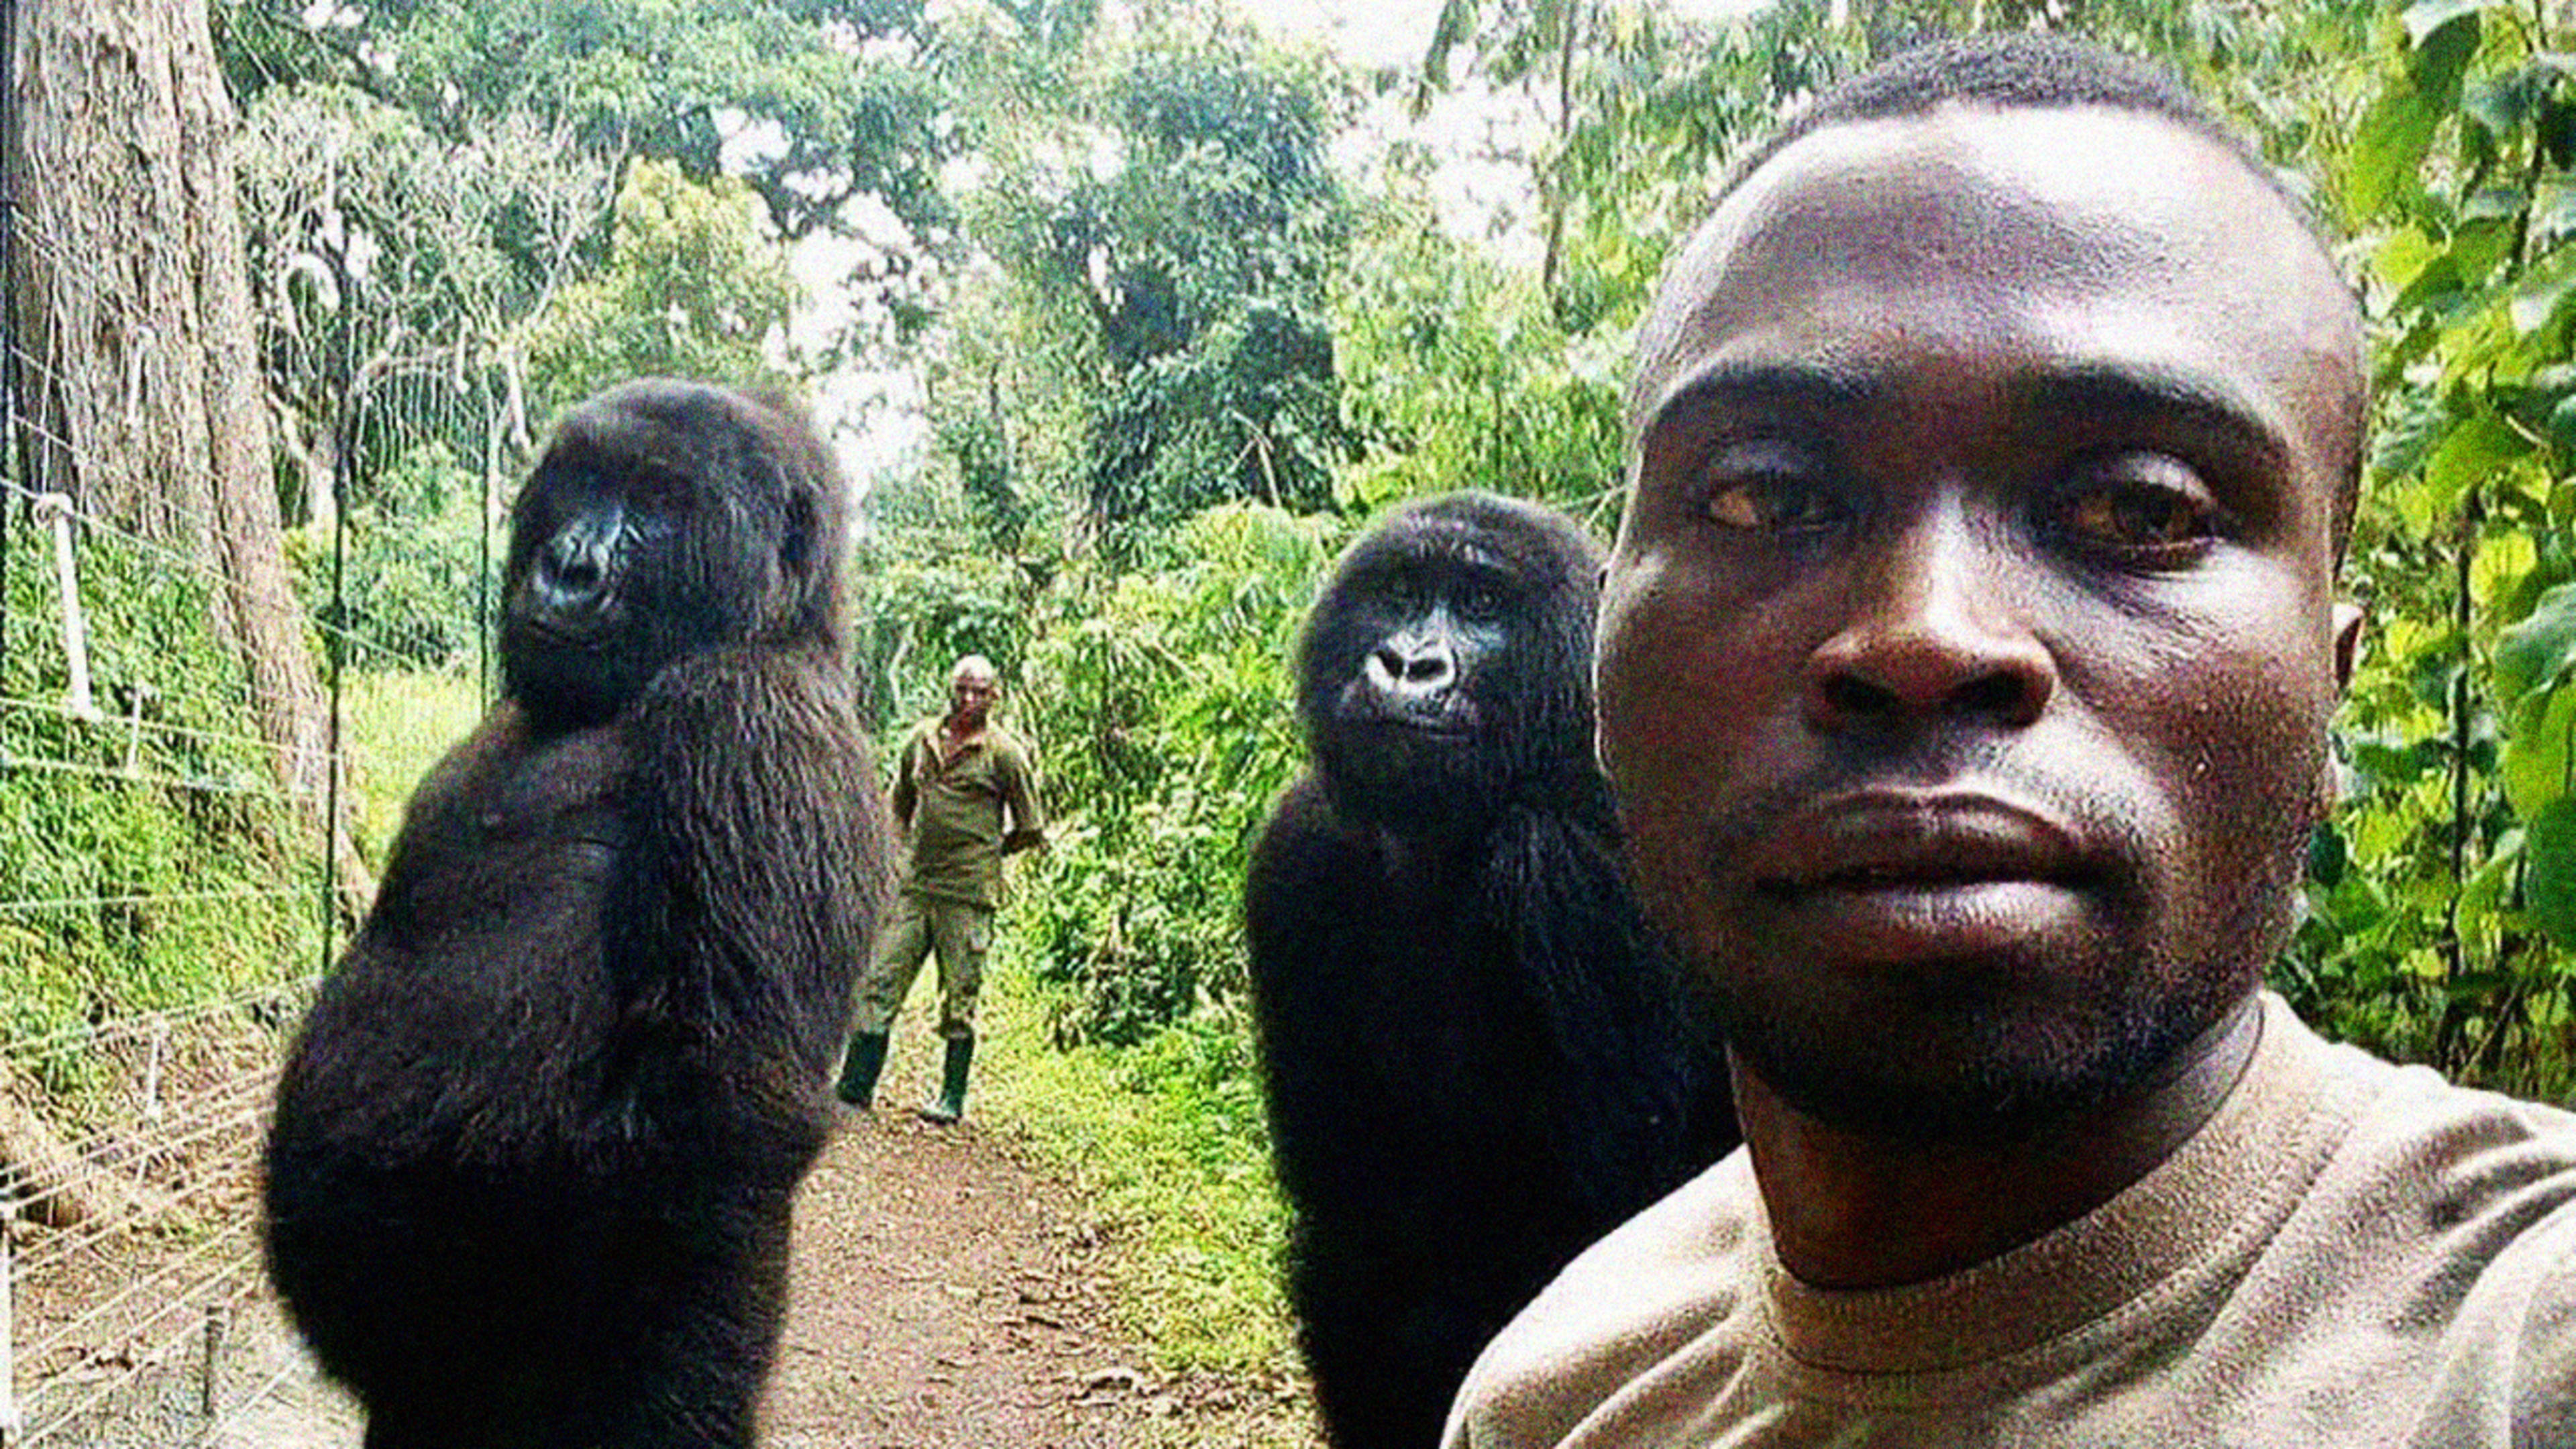 Like Instagram pros, these Gorillas posed for selfies with the man who rescued them from poachers